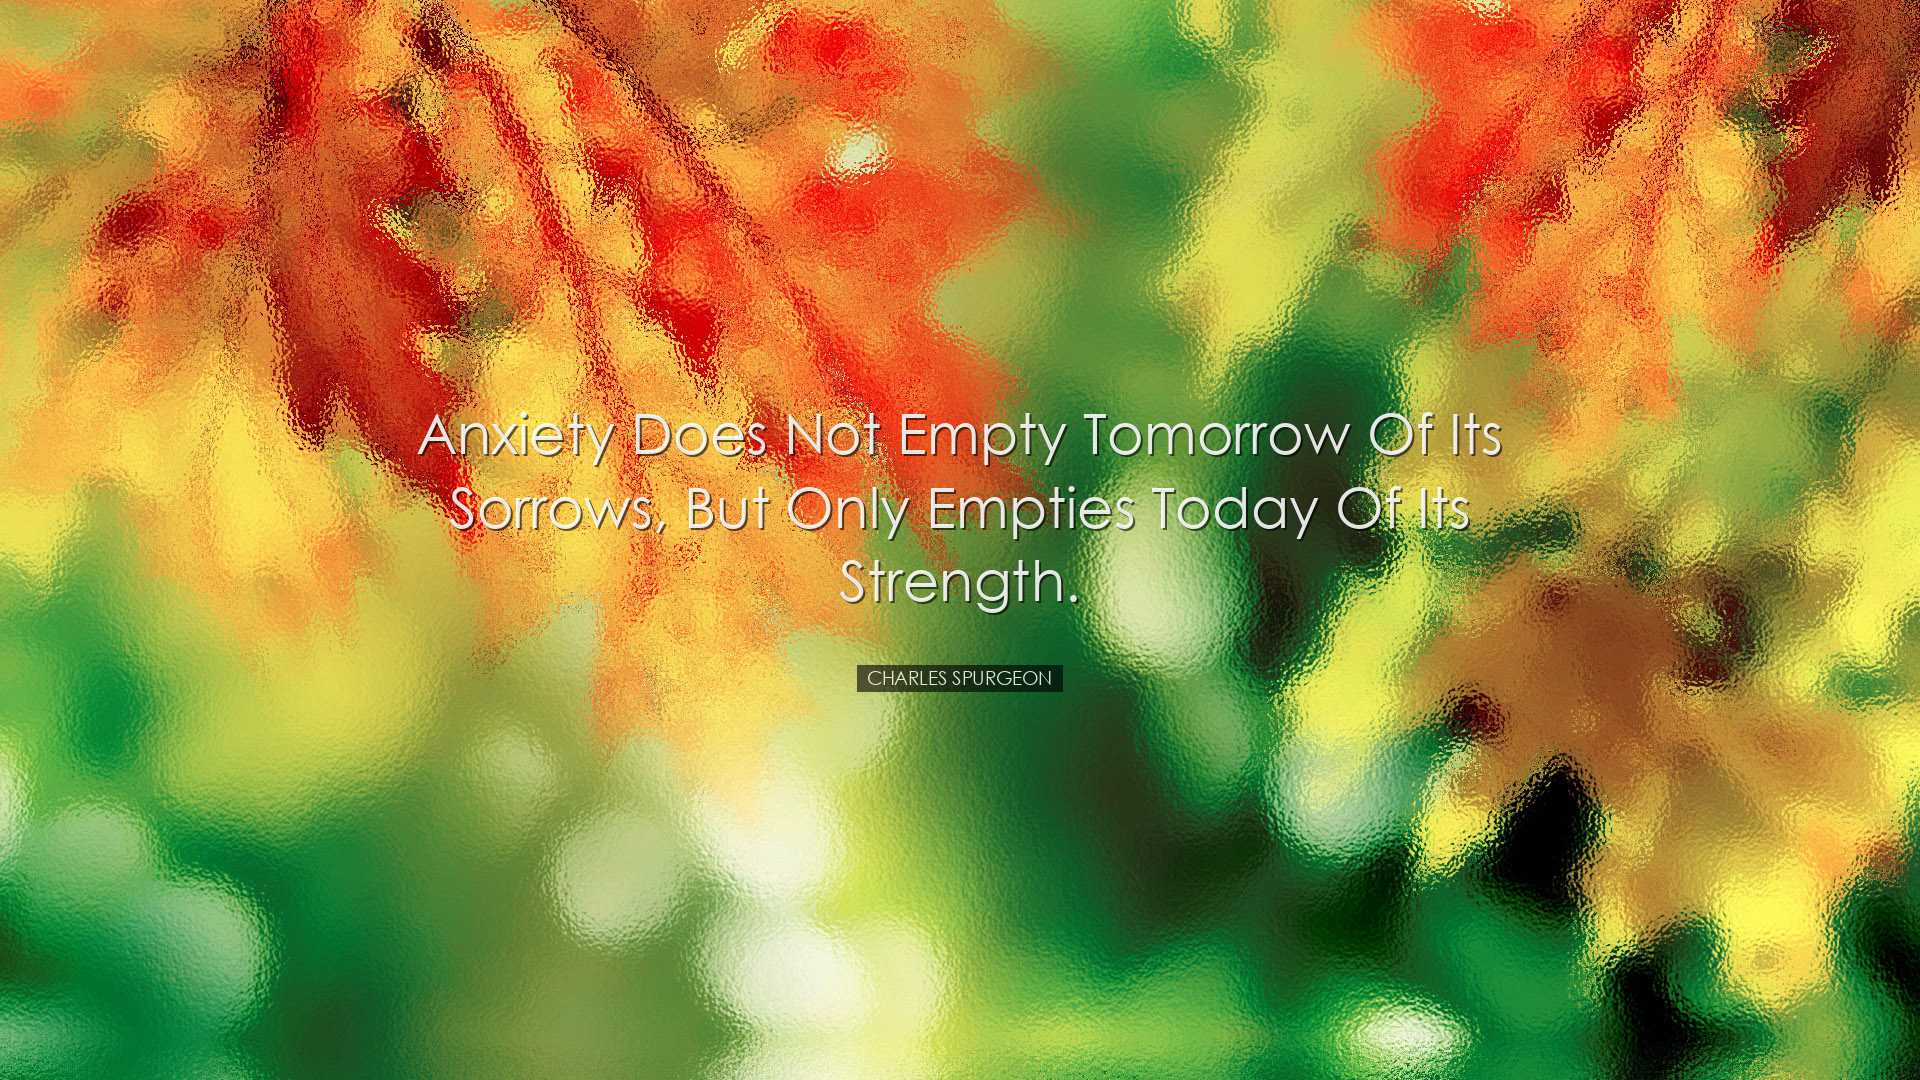 Anxiety does not empty tomorrow of its sorrows, but only empties t